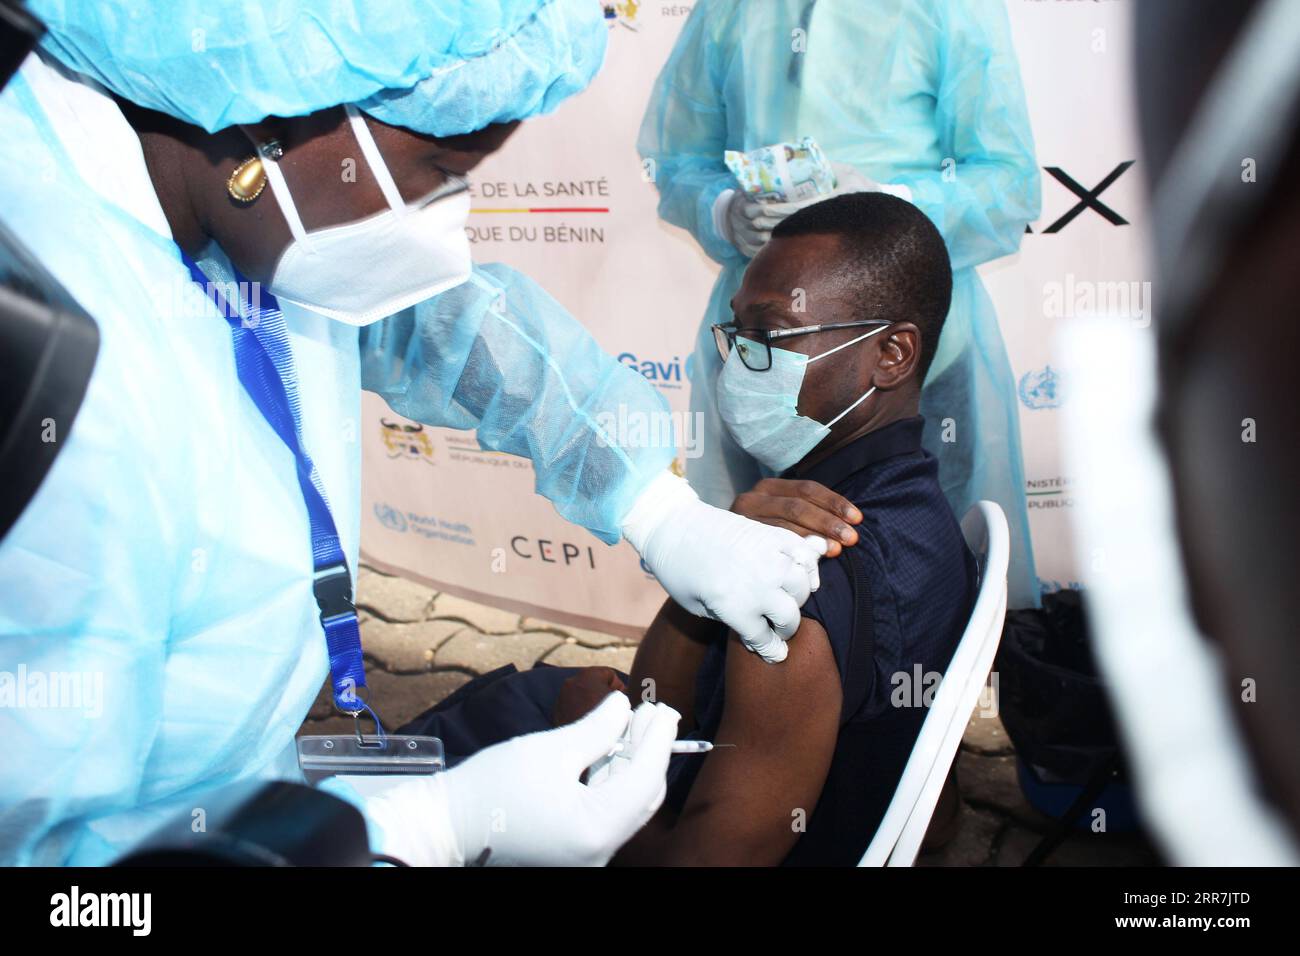 210330 -- COTONOU, March 30, 2021 -- Benin s Minister of Health Benjamin Hounkpatin receives a shot of COVID-19 vaccine at the Congress Palace of Cotonou, Benin, March 29, 2021. Benin launched on Monday the first phase of vaccination against COVID-19 that targets groups including health workers and people aged 60 and above. Photo by /Xinhua BENIN-COTONOU-COVID-19-VACCINATION SeraphinxZounyekpe PUBLICATIONxNOTxINxCHN Stock Photo